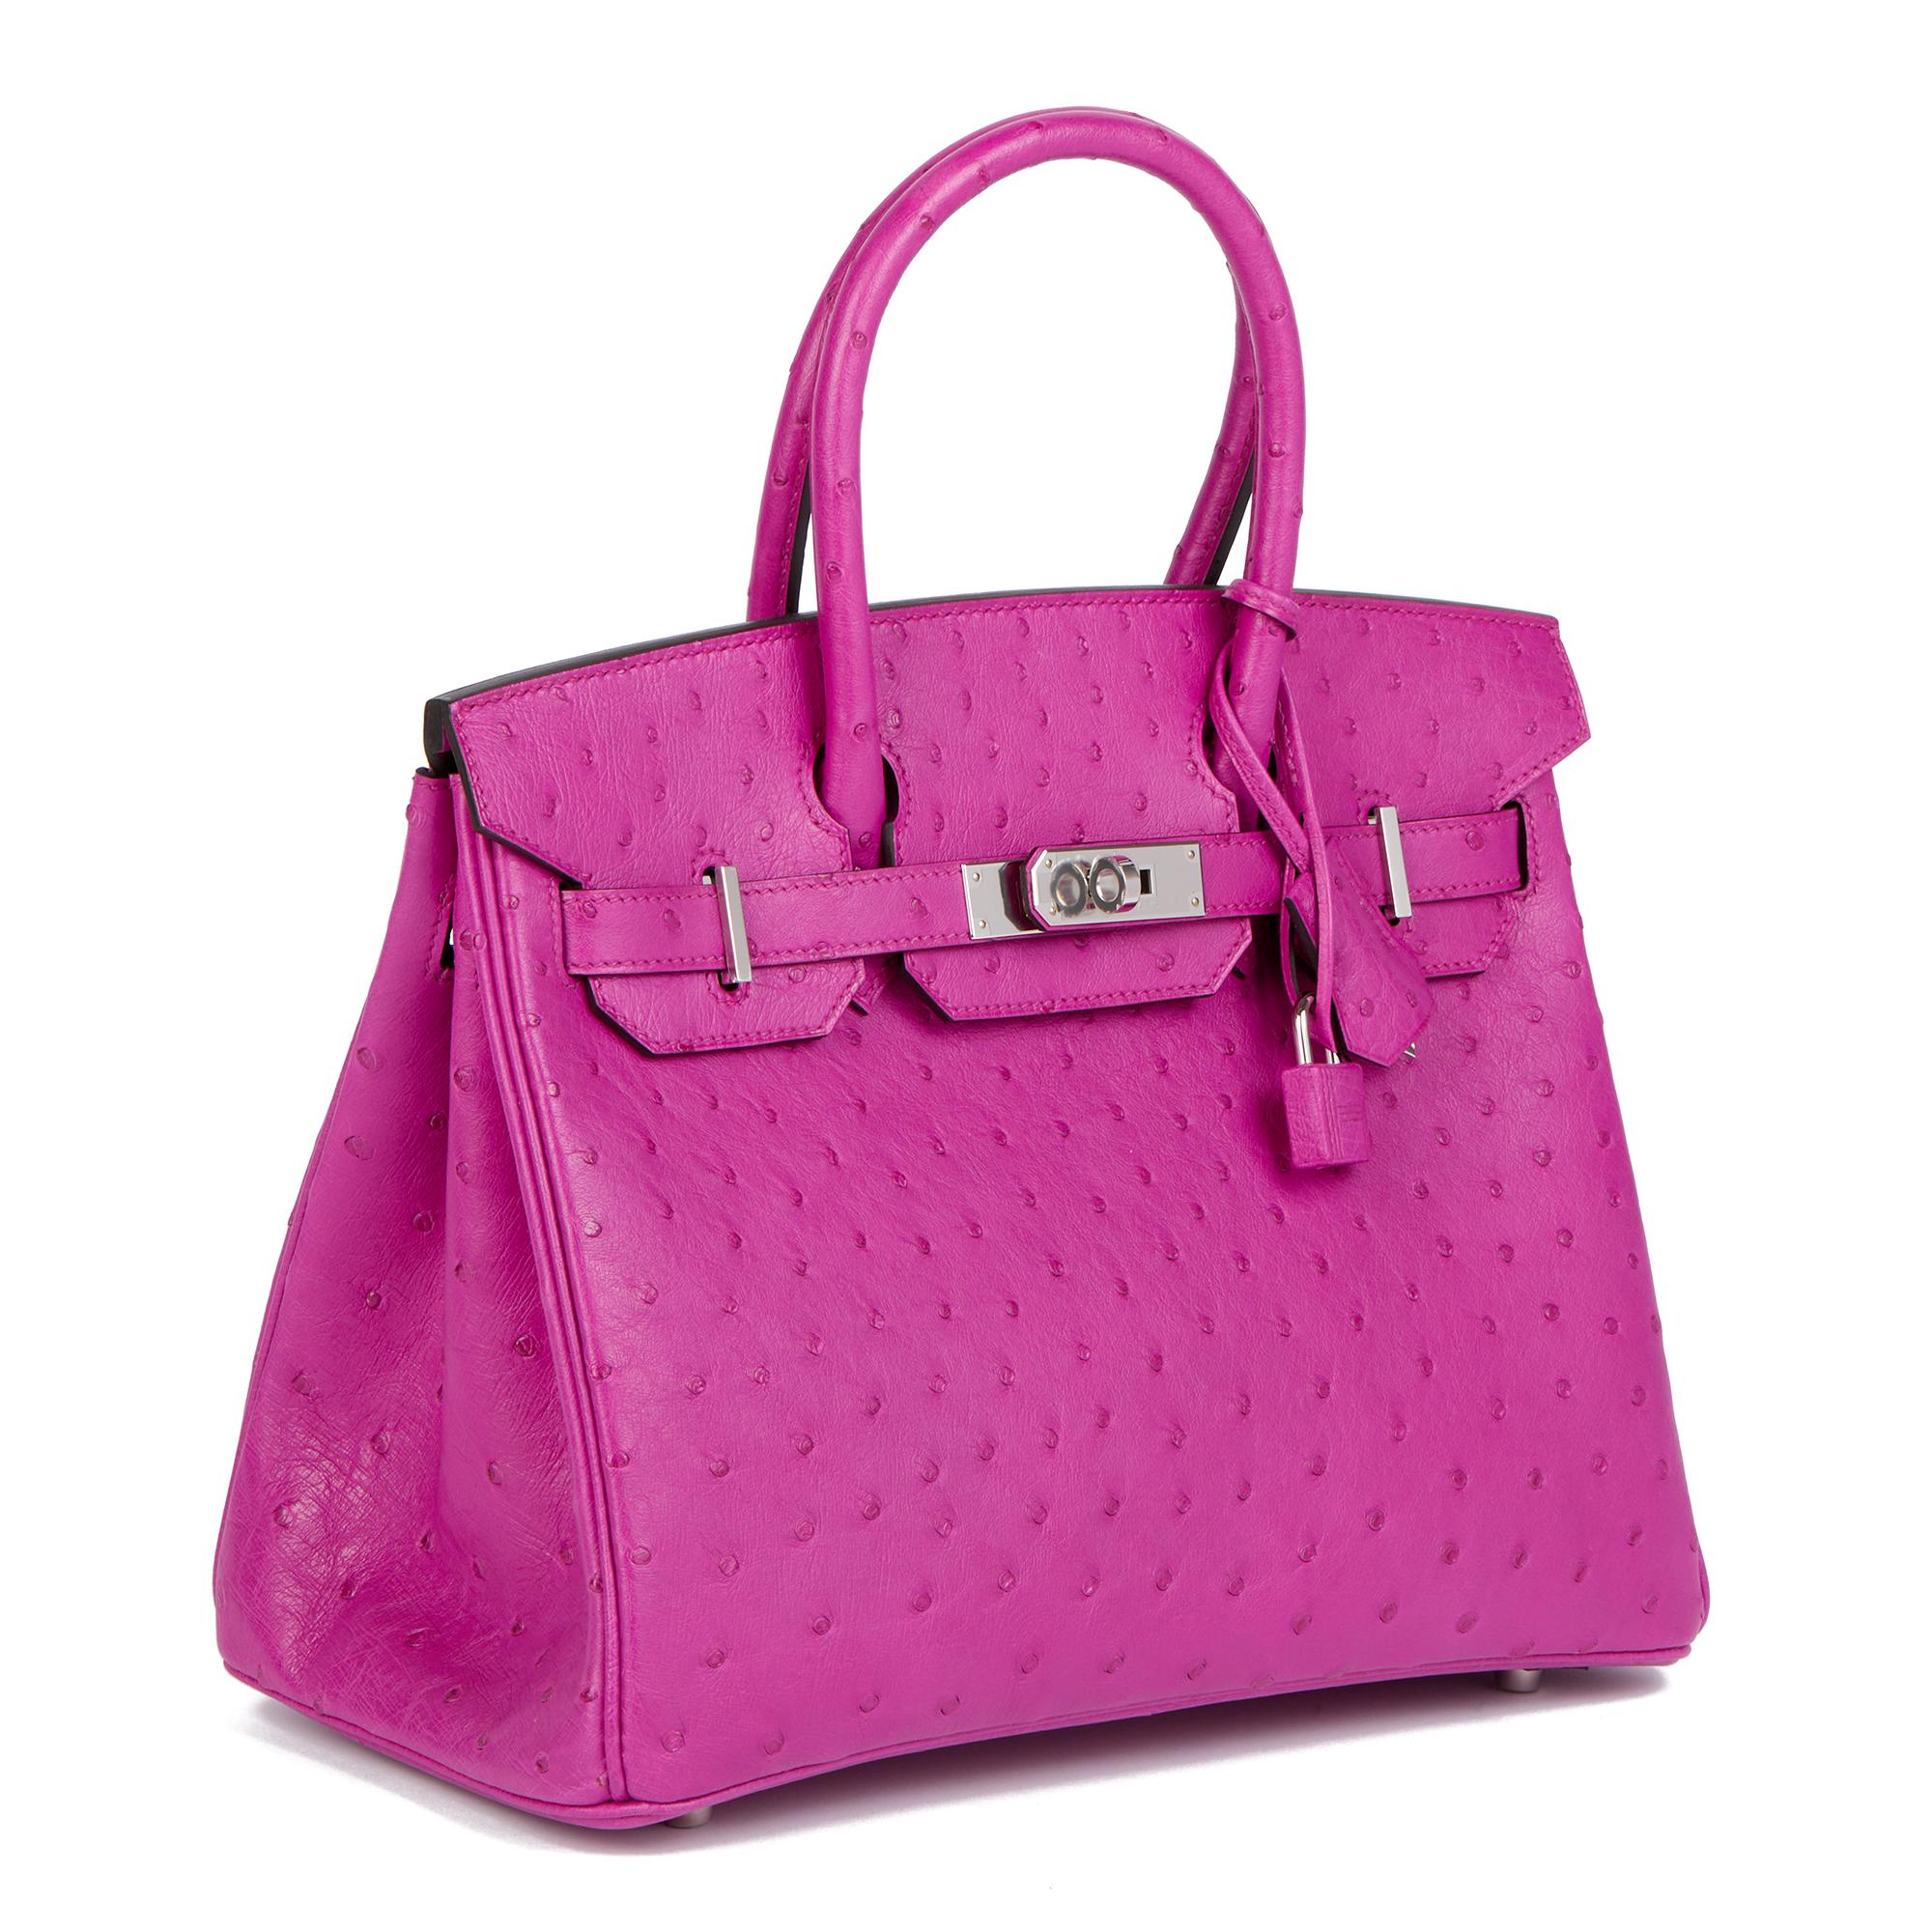 HERMÈS
Rose Pourpre Ostrich Leather Birkin 30cm Retourne

Xupes Reference: CB746
Serial Number: D
Age (Circa): 2019
Accompanied By: Hermès Dust Bag, Box, Padlock, Keys, Clochette, Small Dust Bag,  Care Booklet, Raincover, Ribbon, Invoice &